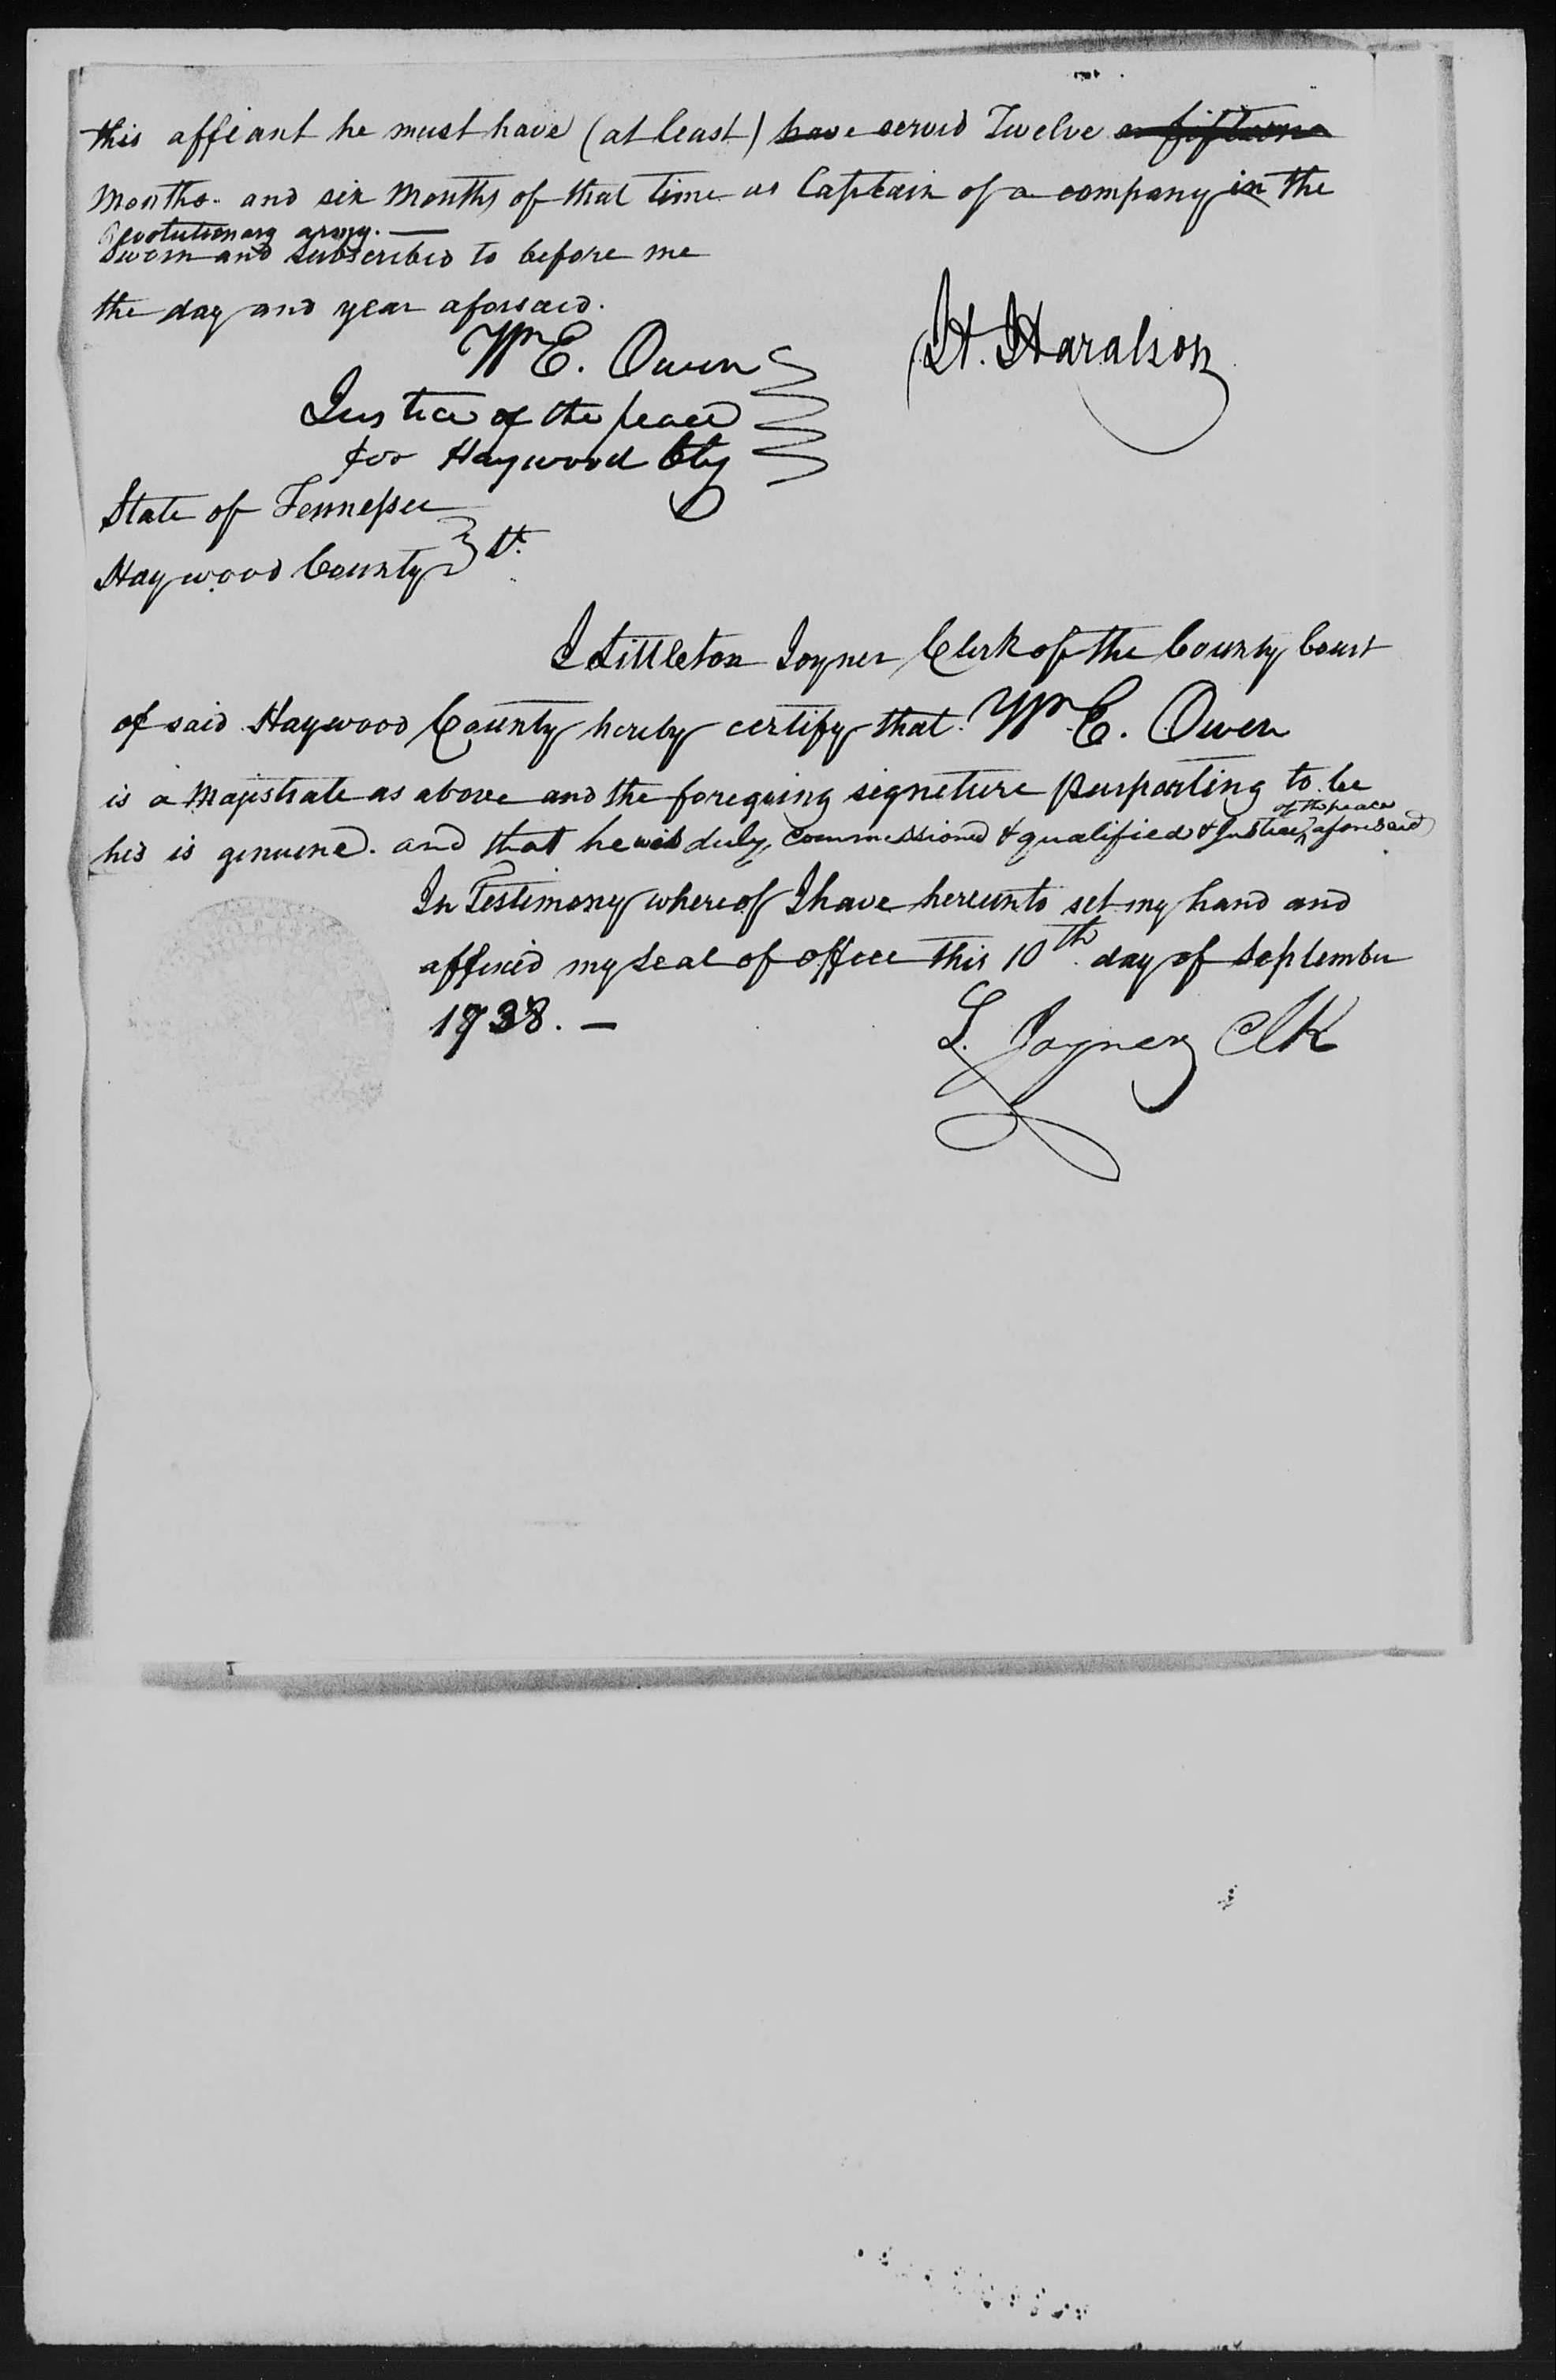 Affidavit of Herndon Haralson in support of a Pension Claim for Rachel Debow, 10 September 1838, page 2